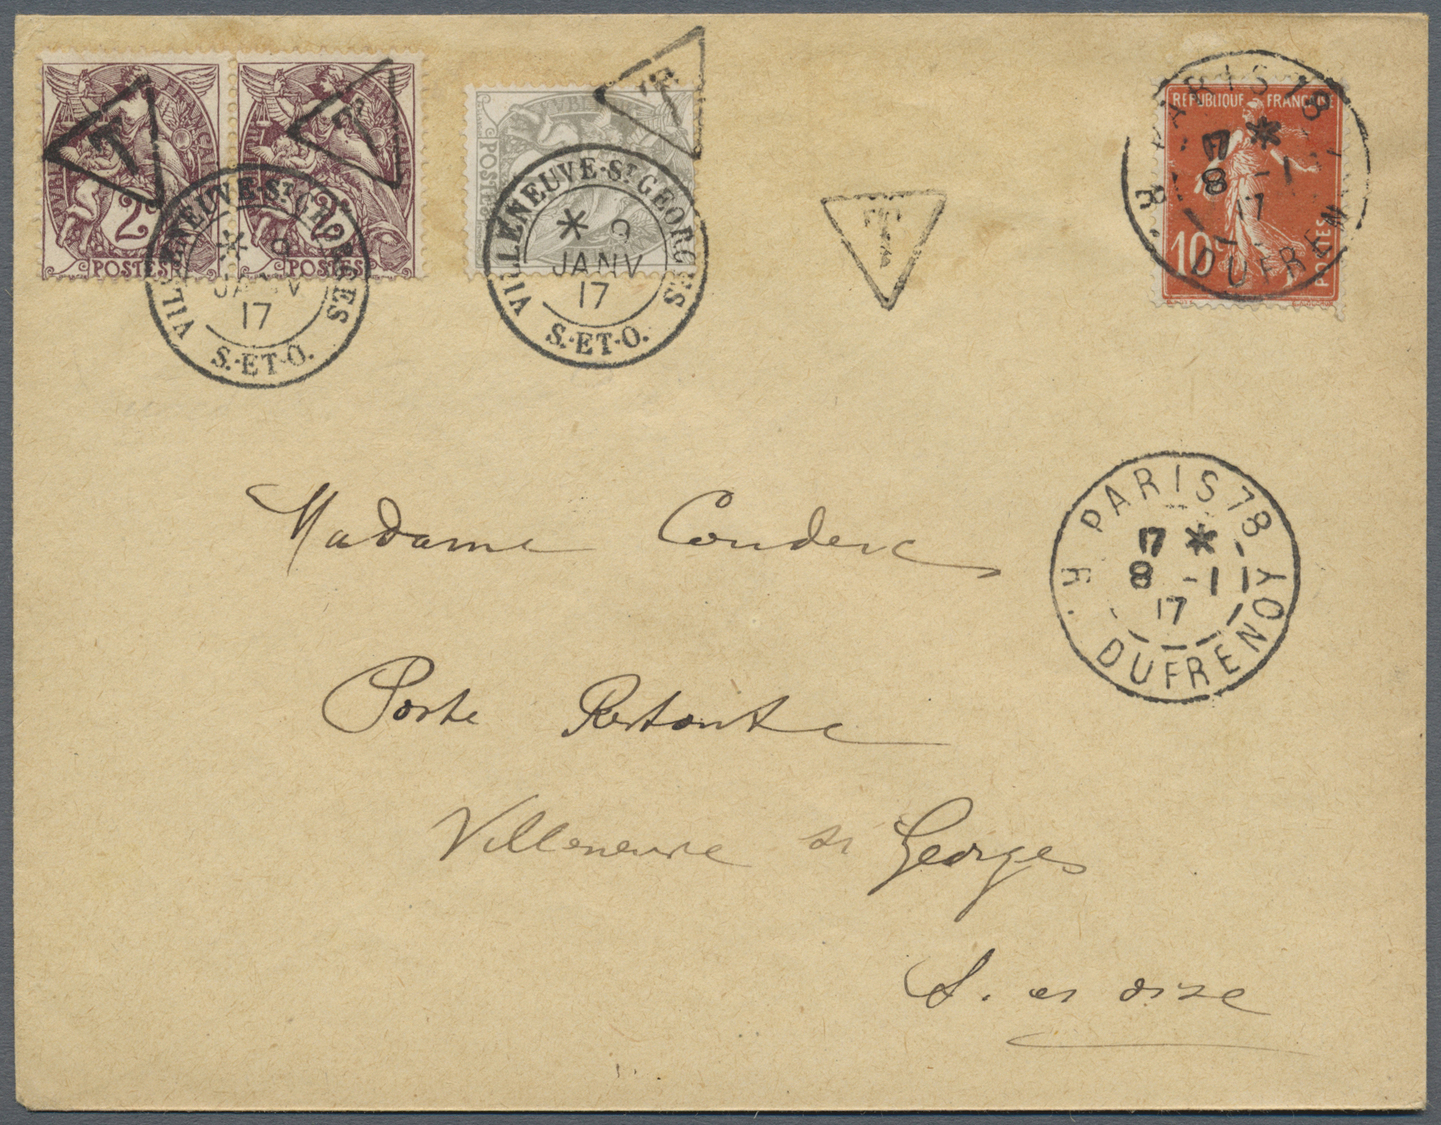 Br Frankreich - Portomarken: 1917 (8.1.), Underpaid Cover Bearing 10c Red Only Used From Paris To Villeneuve St. - 1859-1959 Covers & Documents